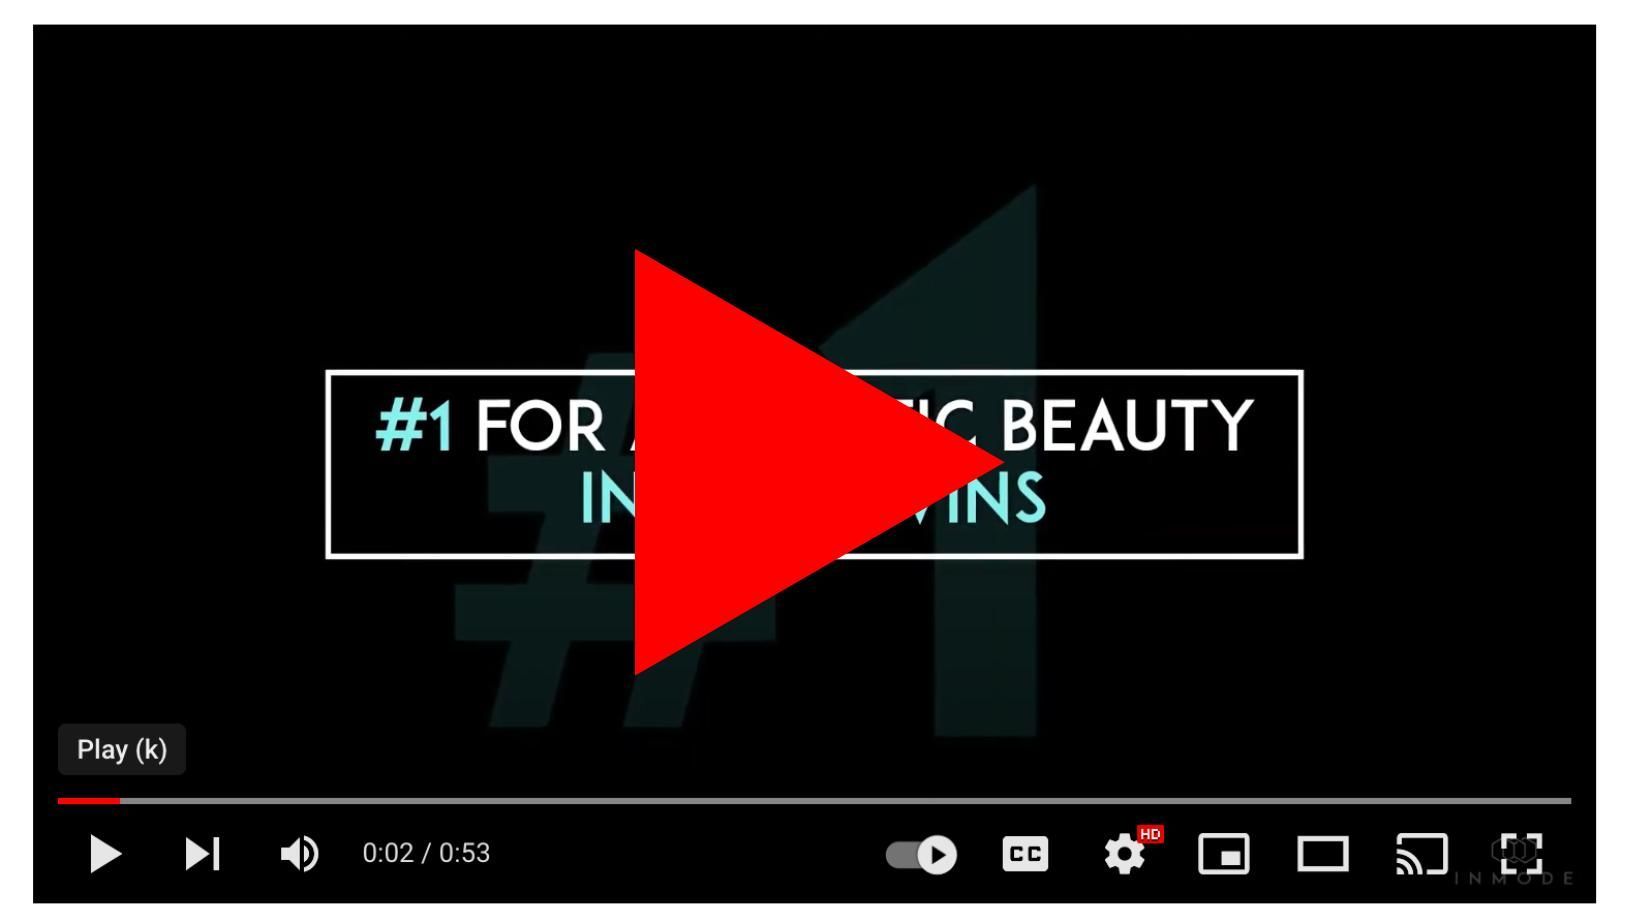 Link to video of InMode beauty awards